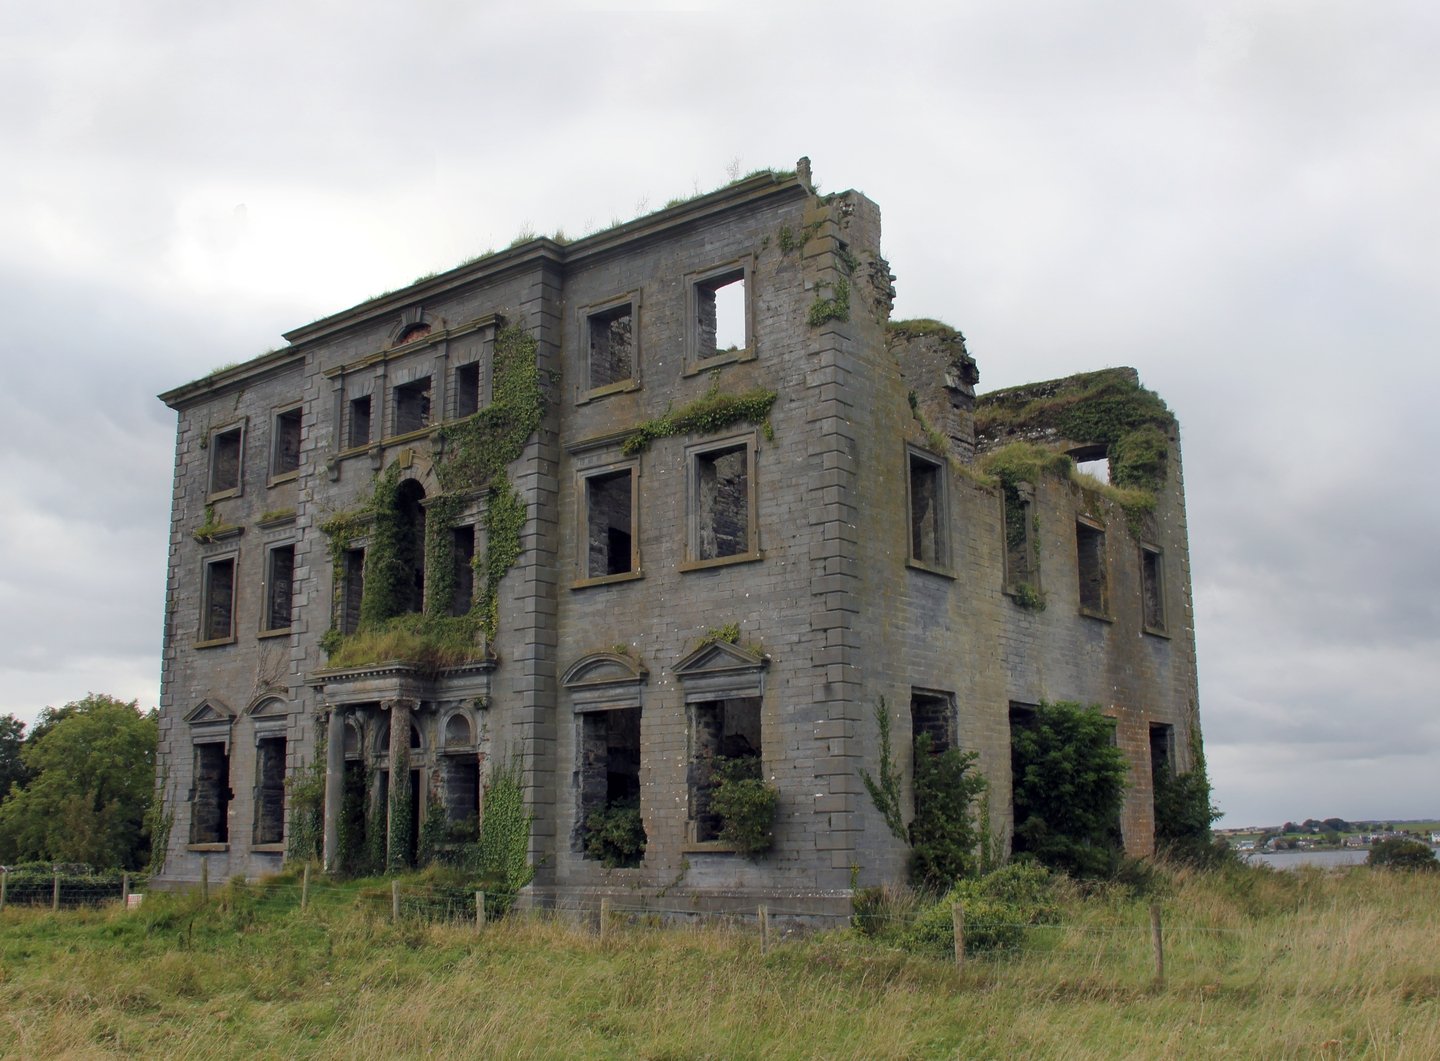 The ruins of a large Georgian house